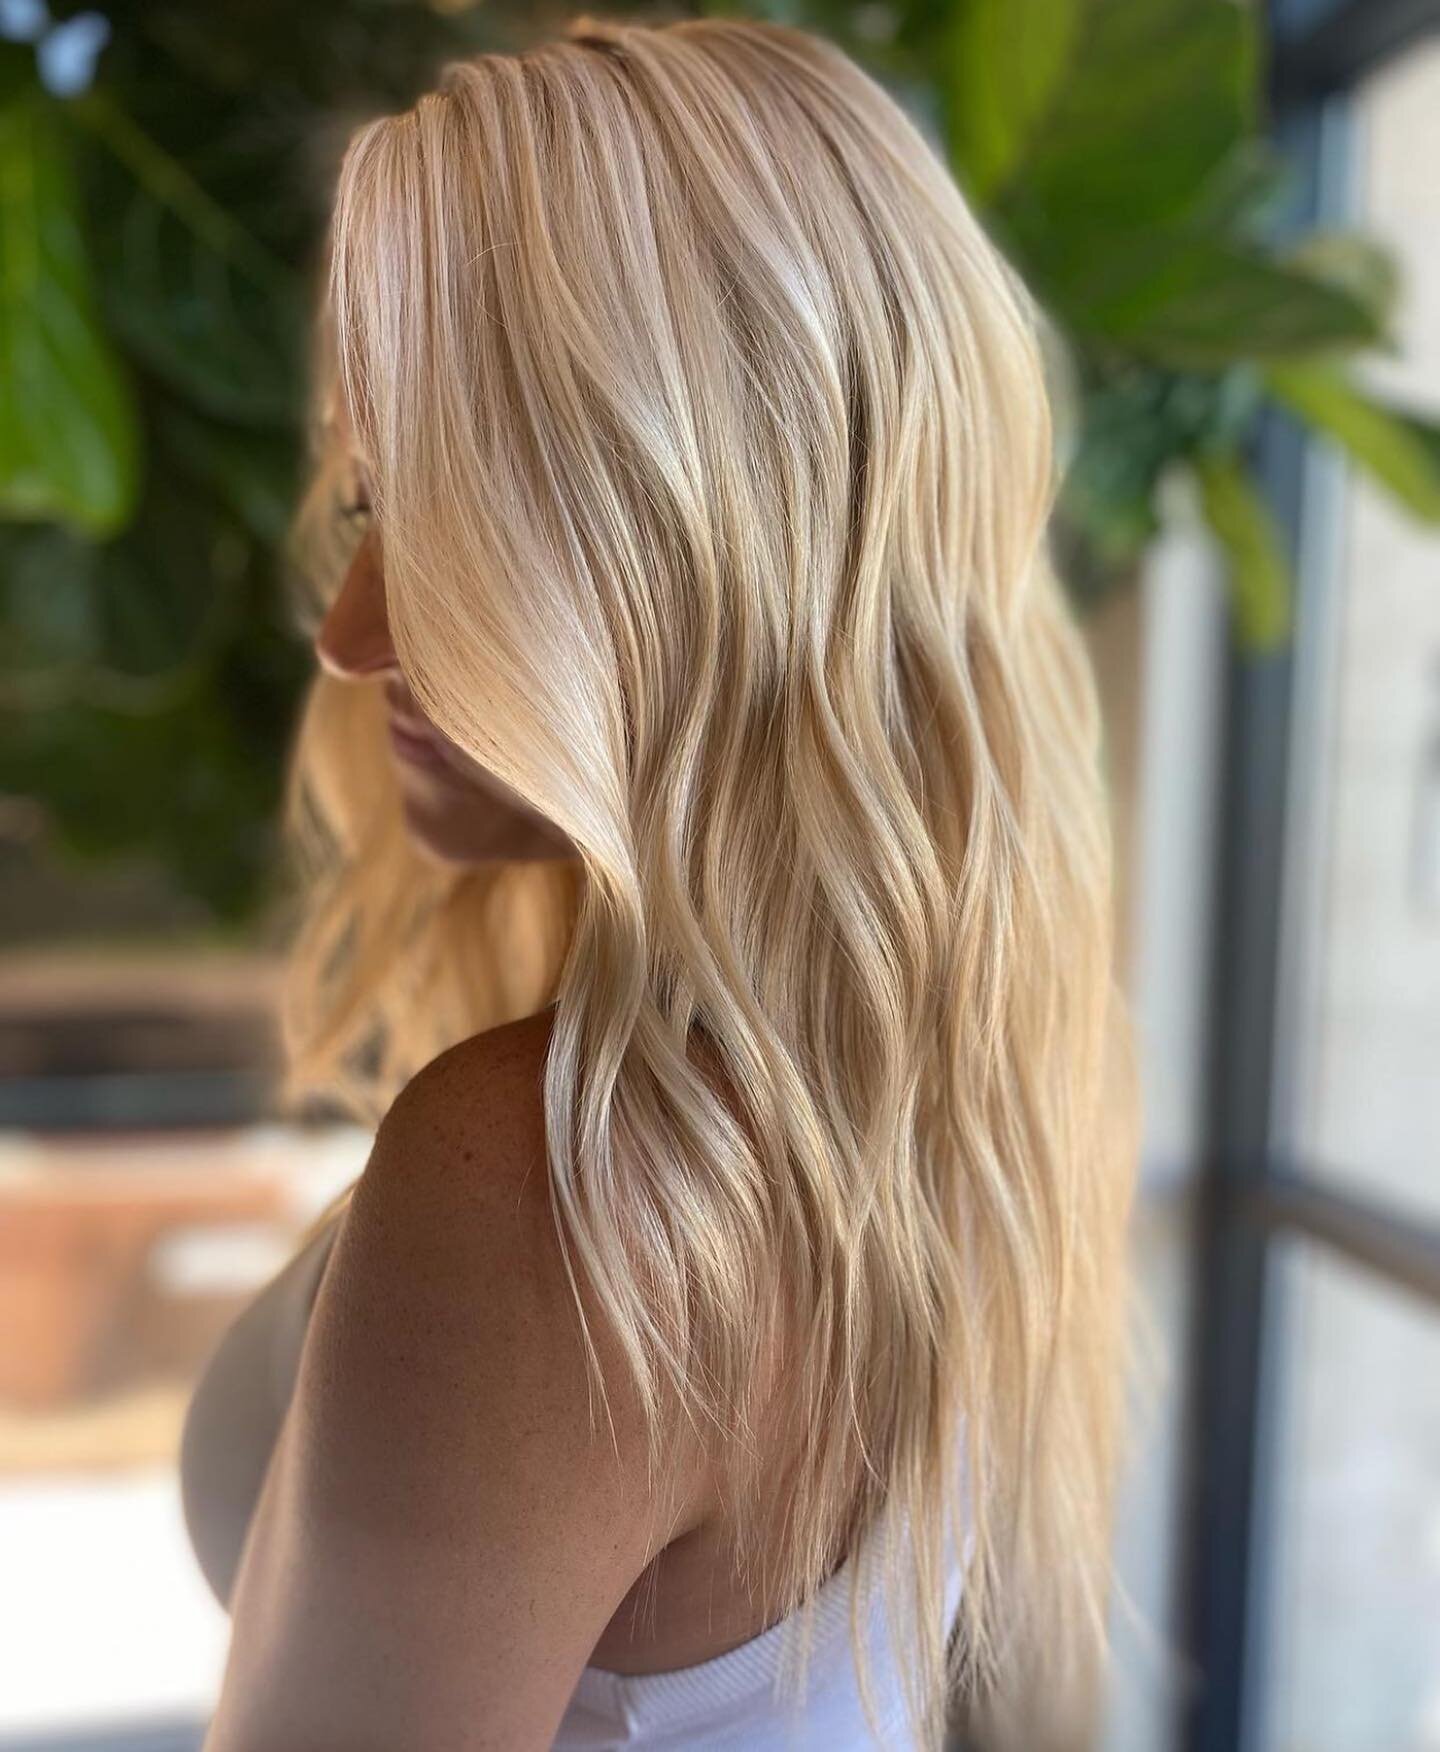 ✨silky smooth transformation✨
By @theheerstylist 

Studio 55 Salons is a premier provider of private salon suites in Sacramento, Roseville and Folsom. 

#studio55salons